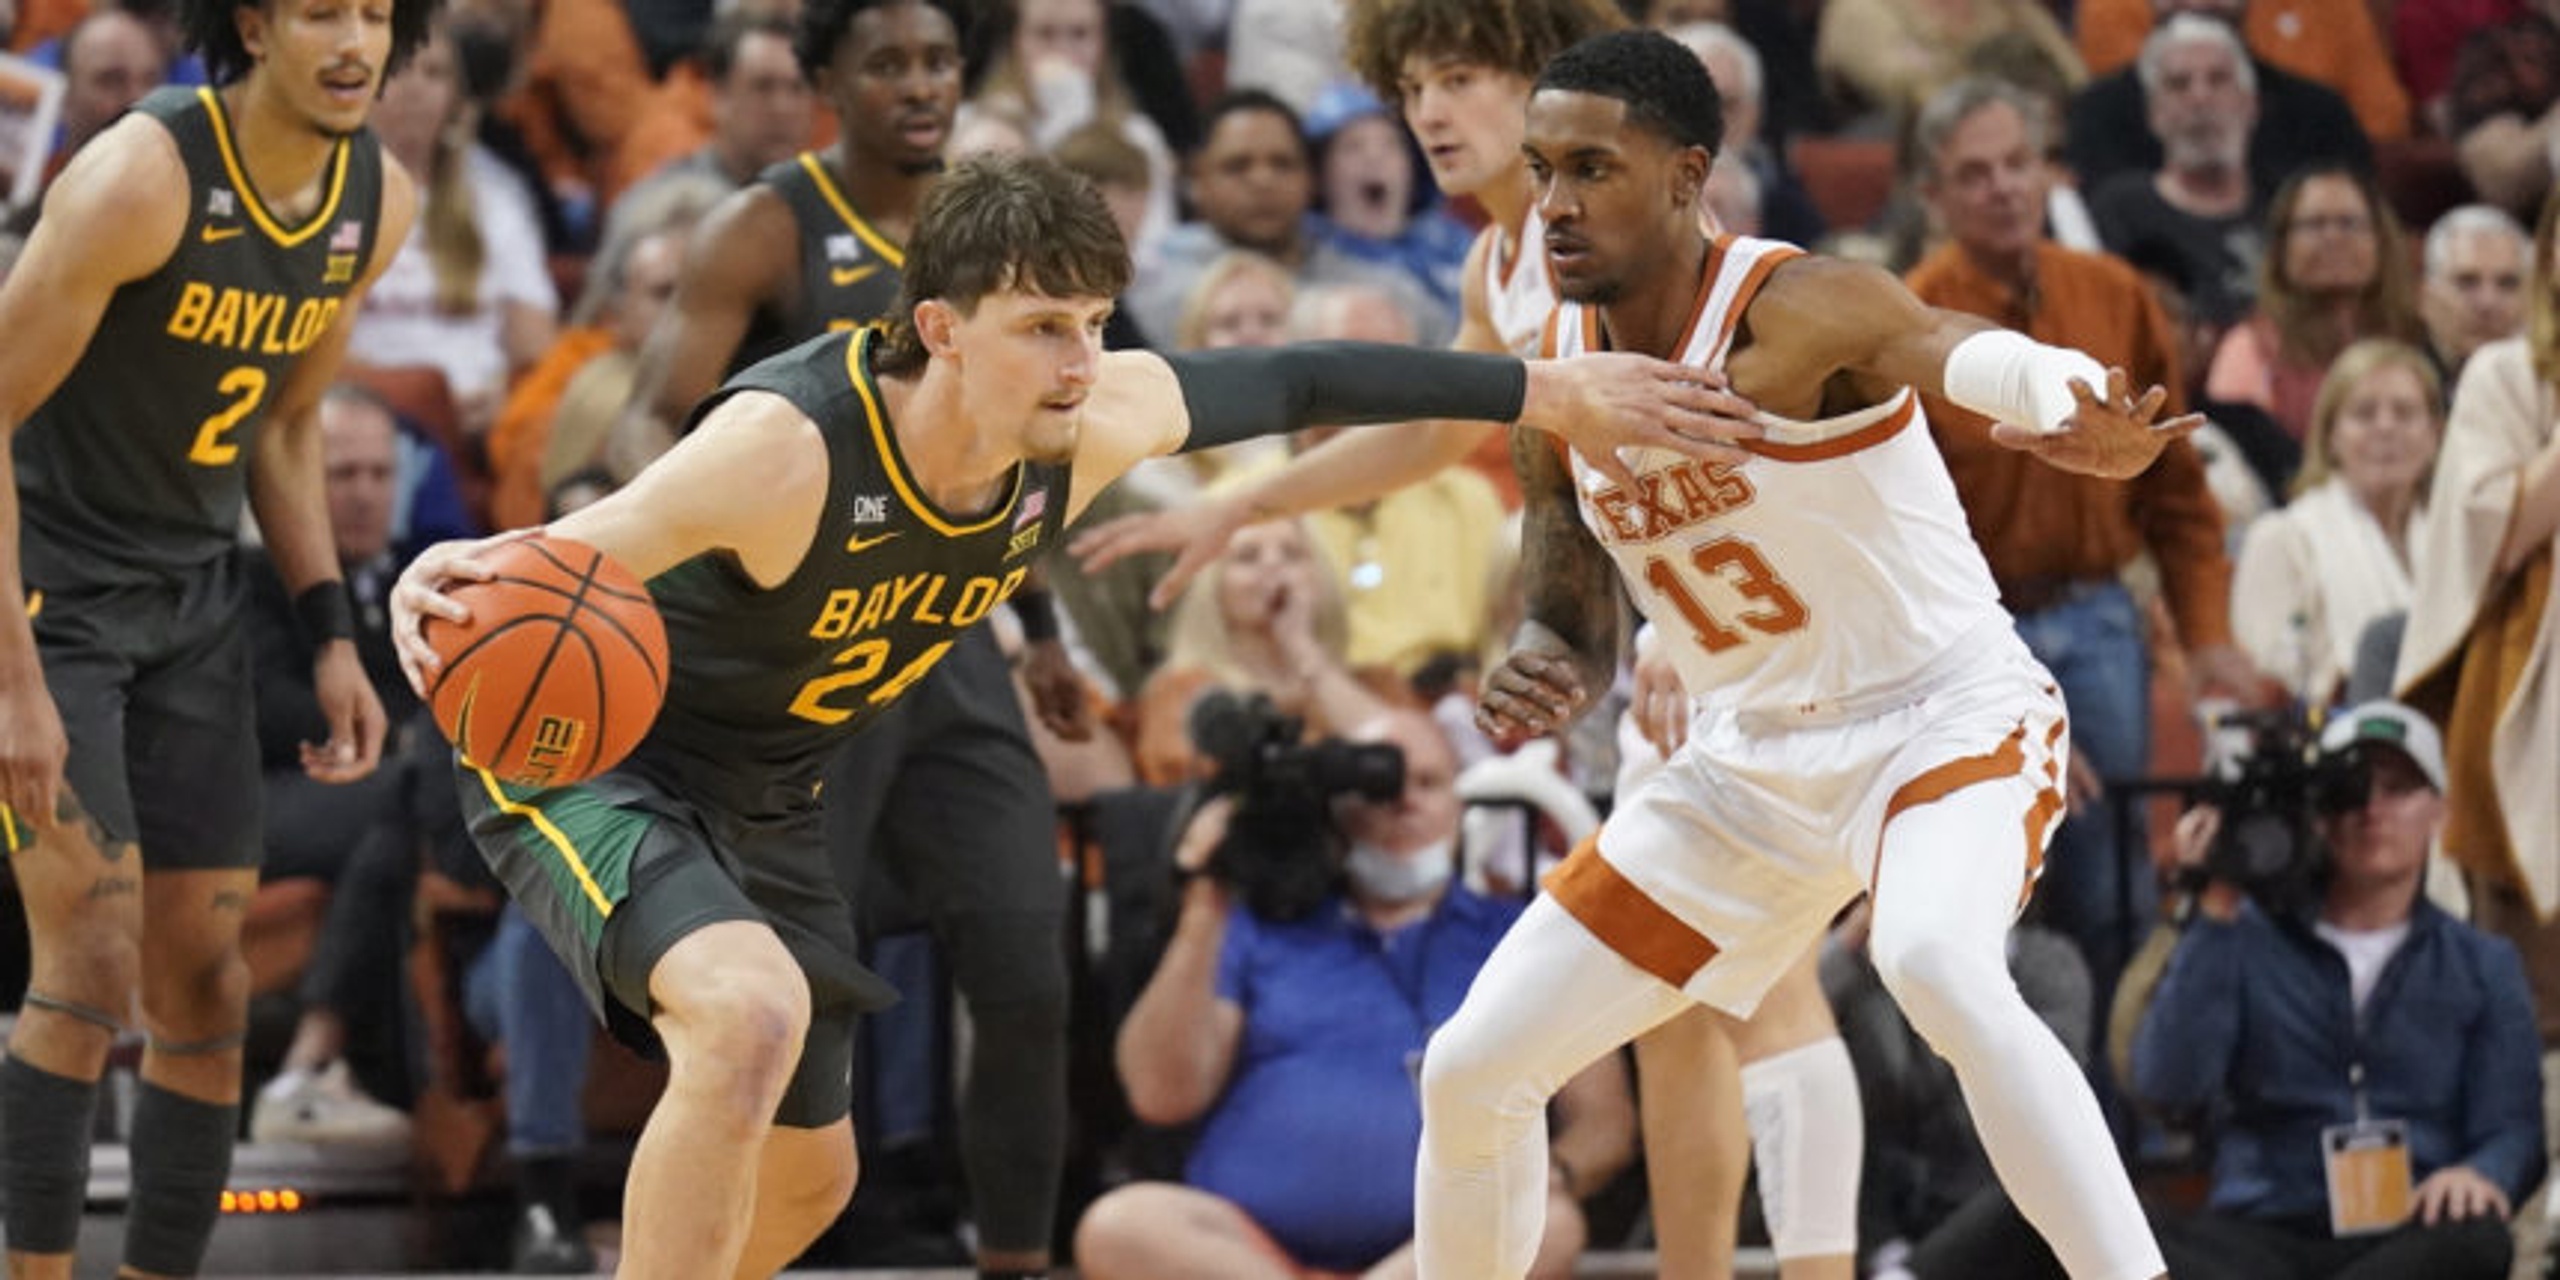 No. 3 Baylor holds off No. 20 Texas in a 68-61 win